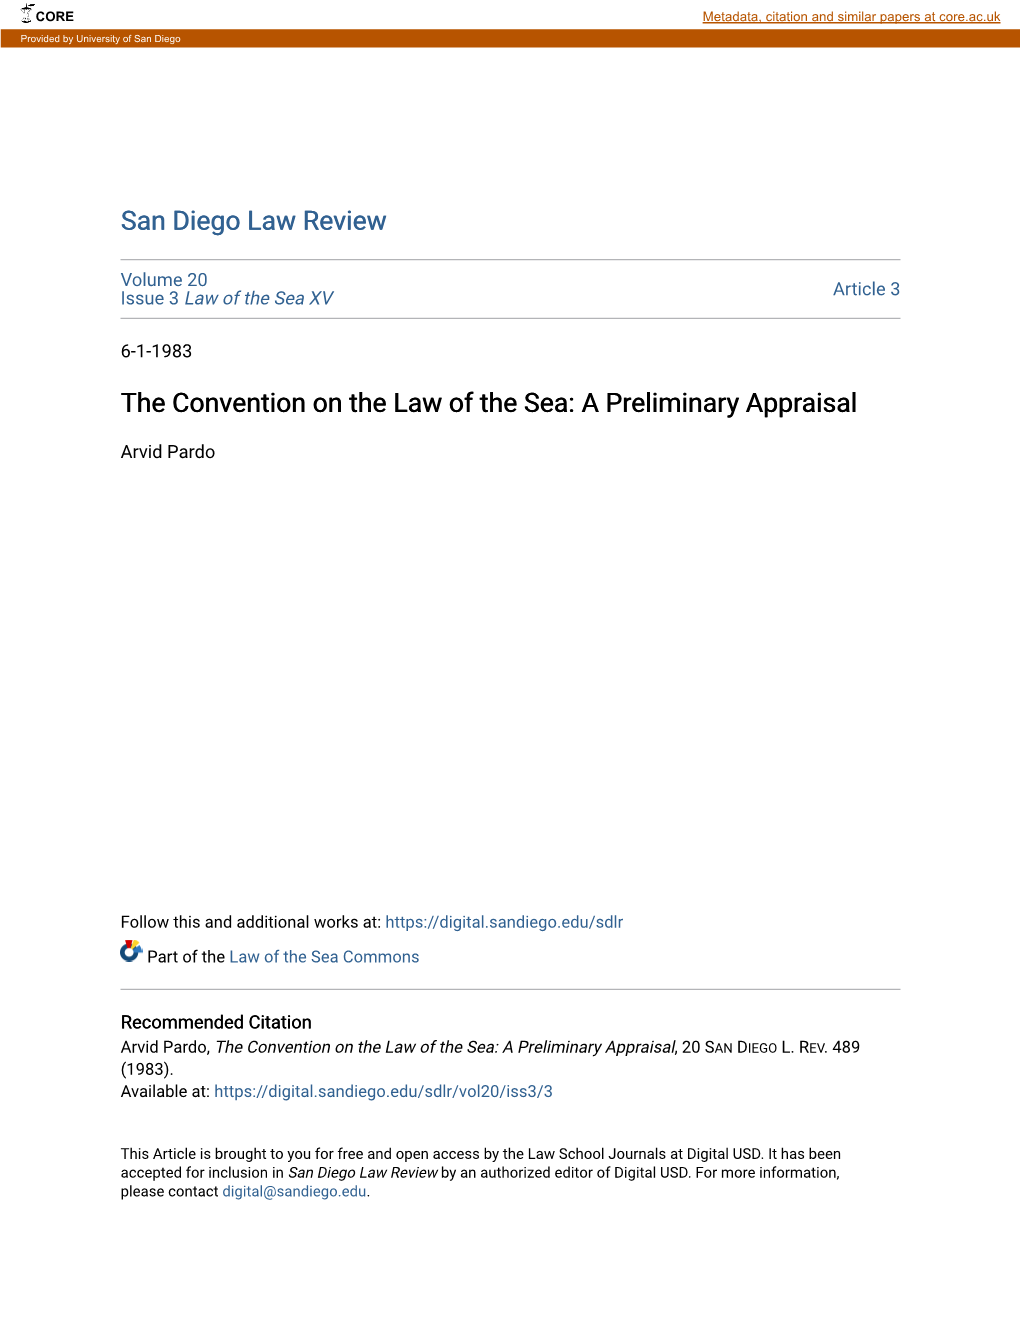 The Convention on the Law of the Sea: a Preliminary Appraisal